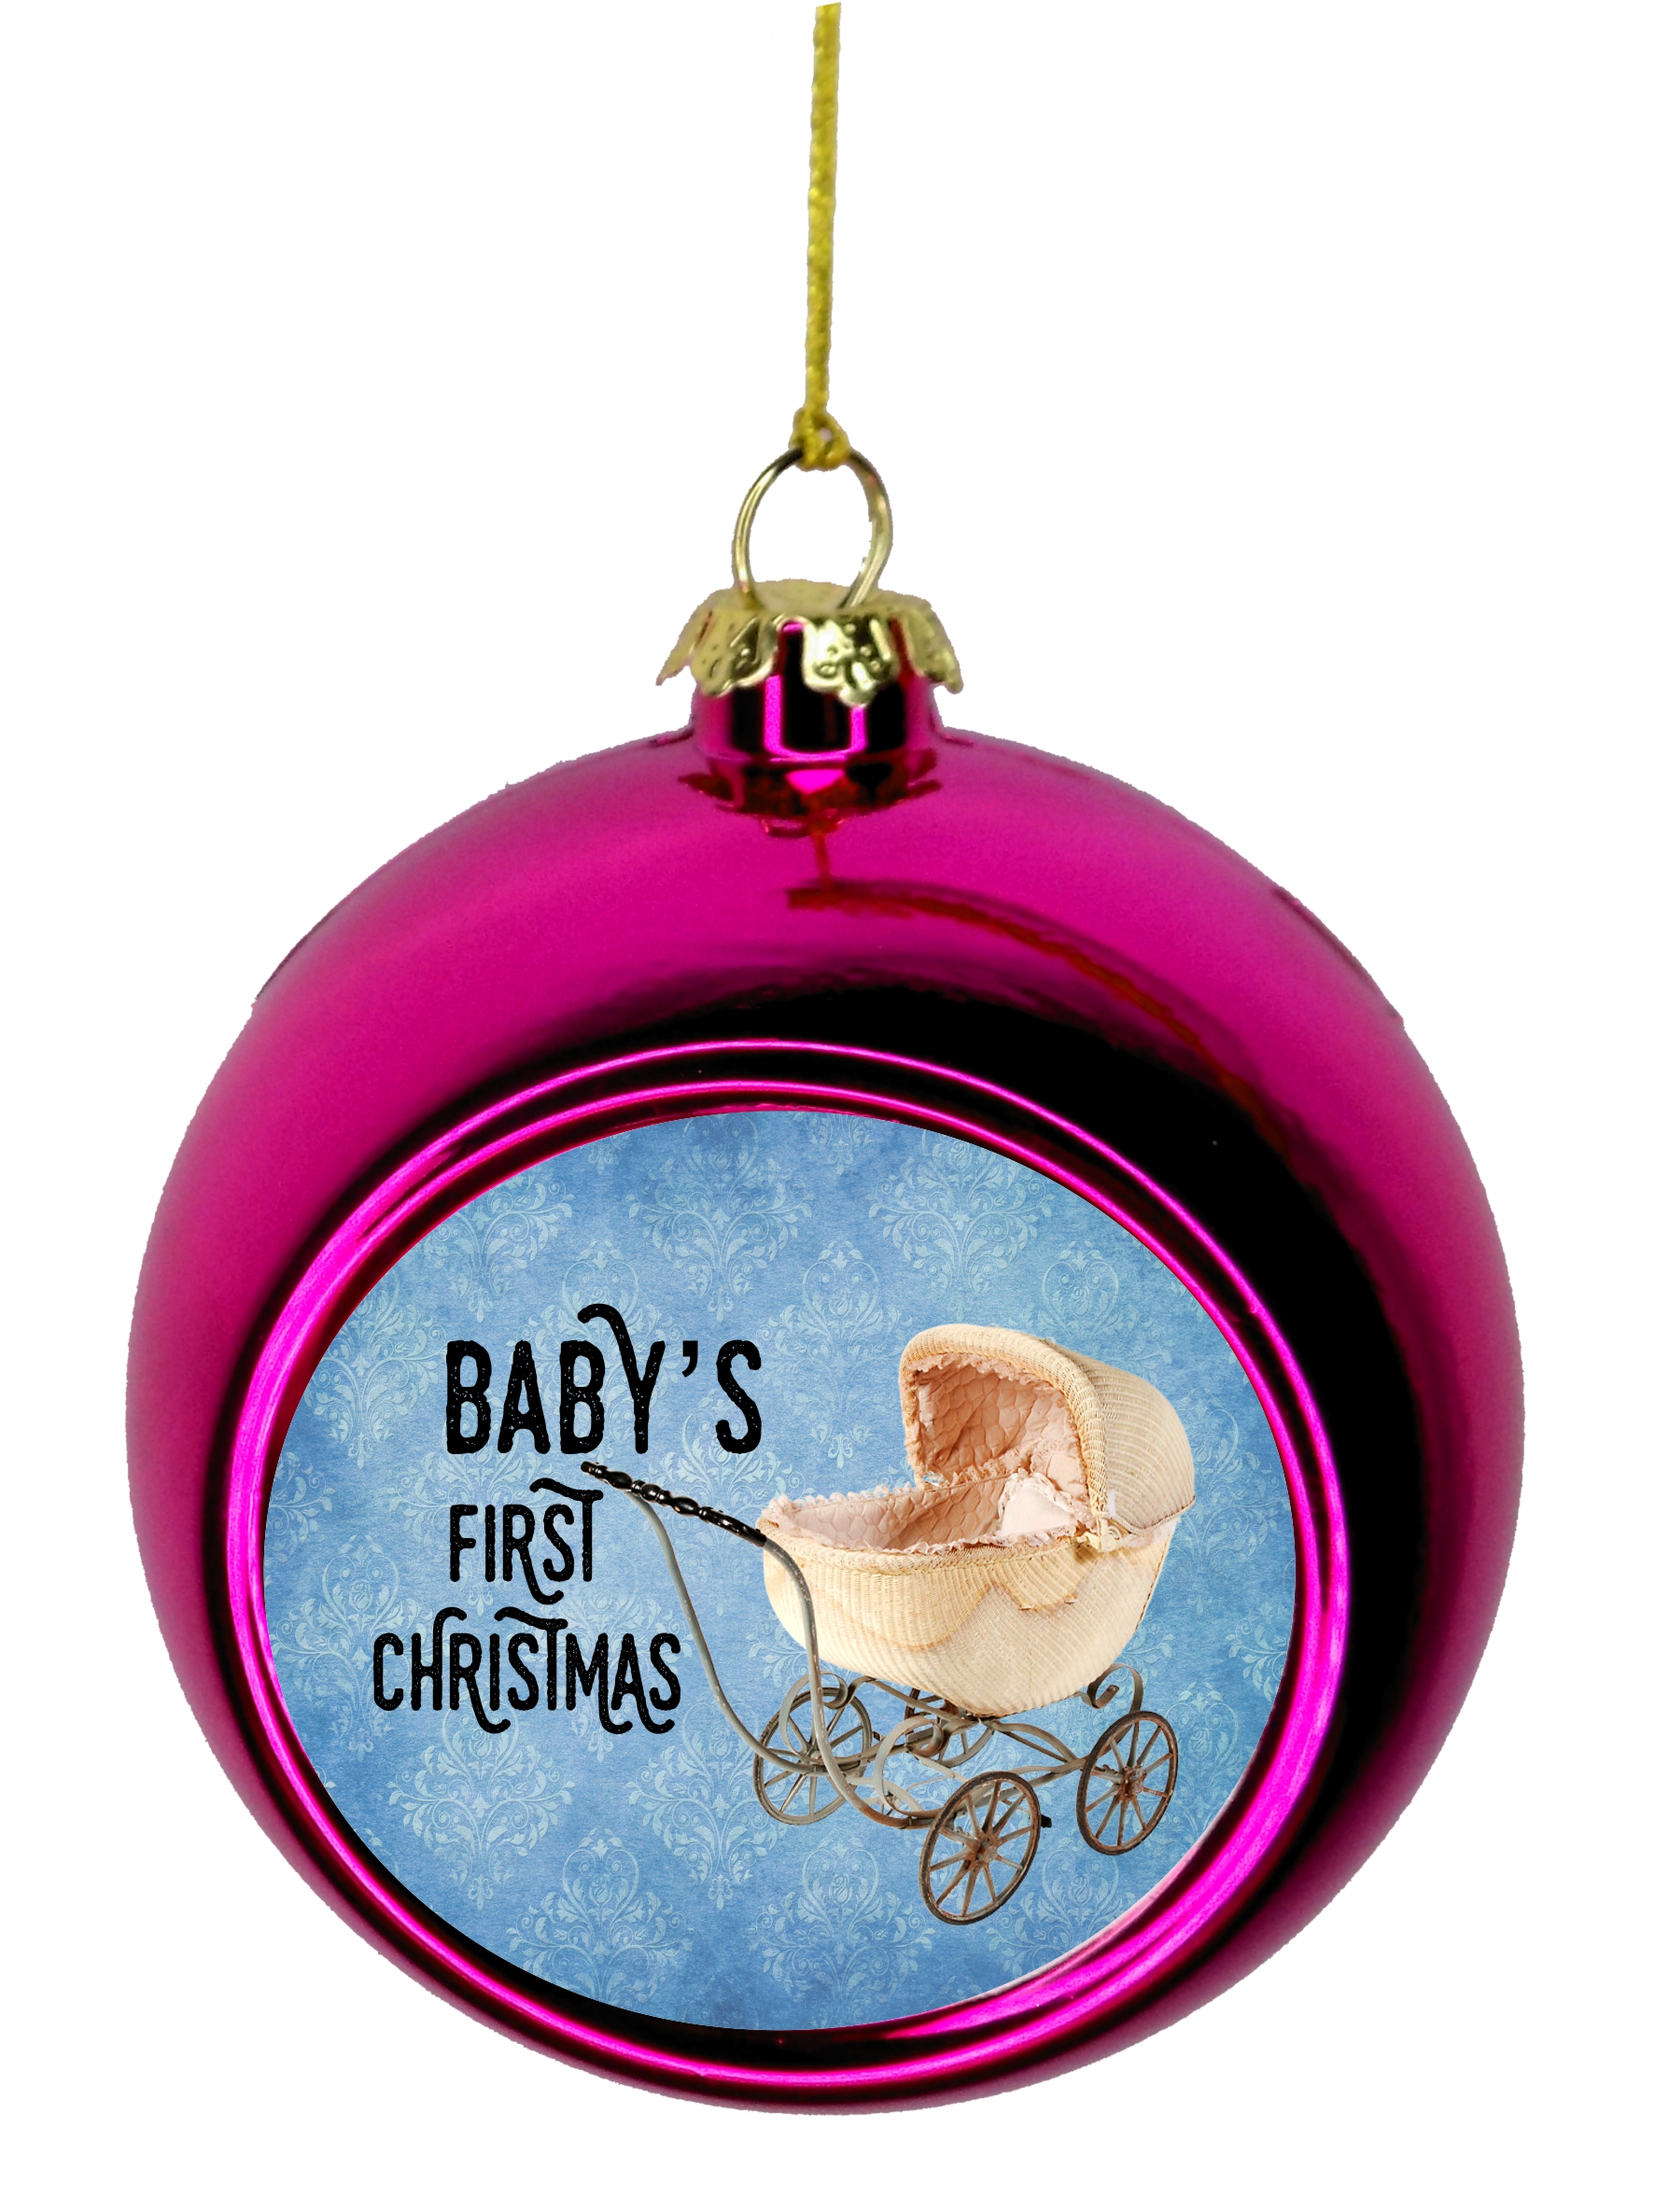 Babys First Xmas Ornament - New Baby Ornament Christmas DÃ©cor Hanging Christmas Ornaments Pink Christmas Ornaments Unique Modern Novelty Tree DÃ©cor Favors Bauble Balls - image 1 of 1